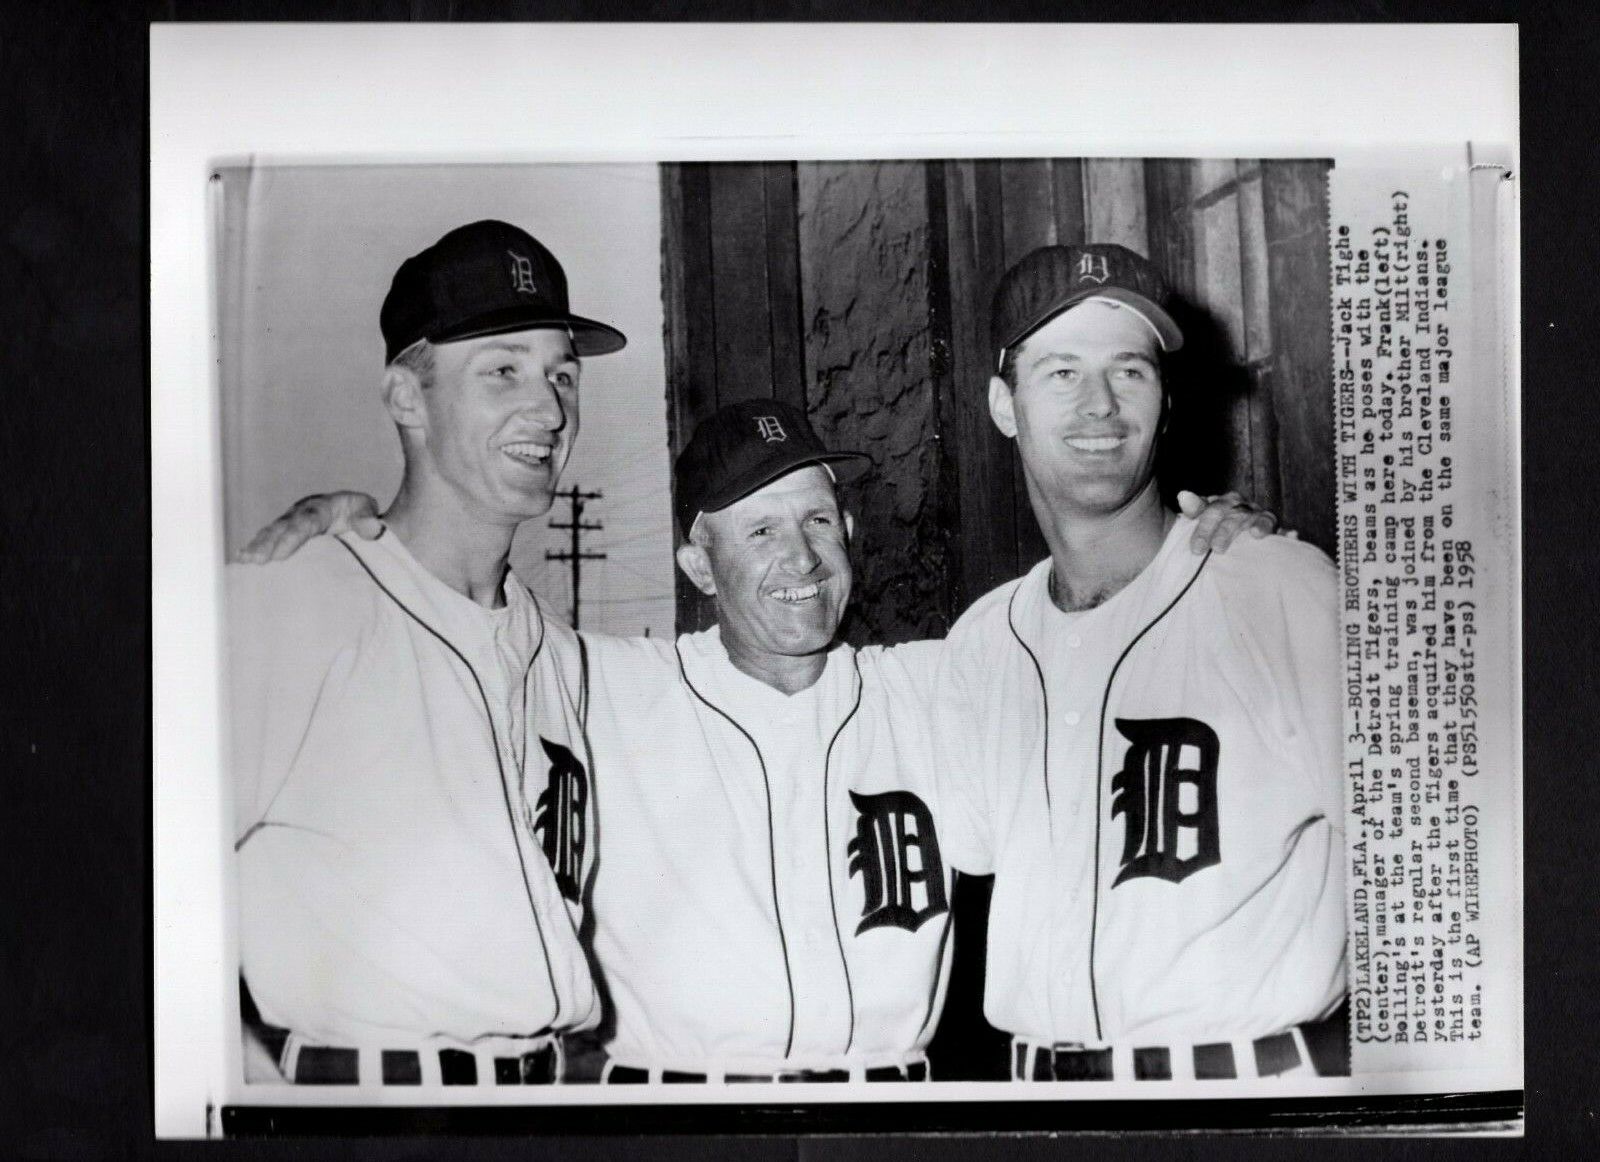 Frank & Milt Bolling Manager Jack Tighe 1958 Press Photo Poster painting Detroit Tigers